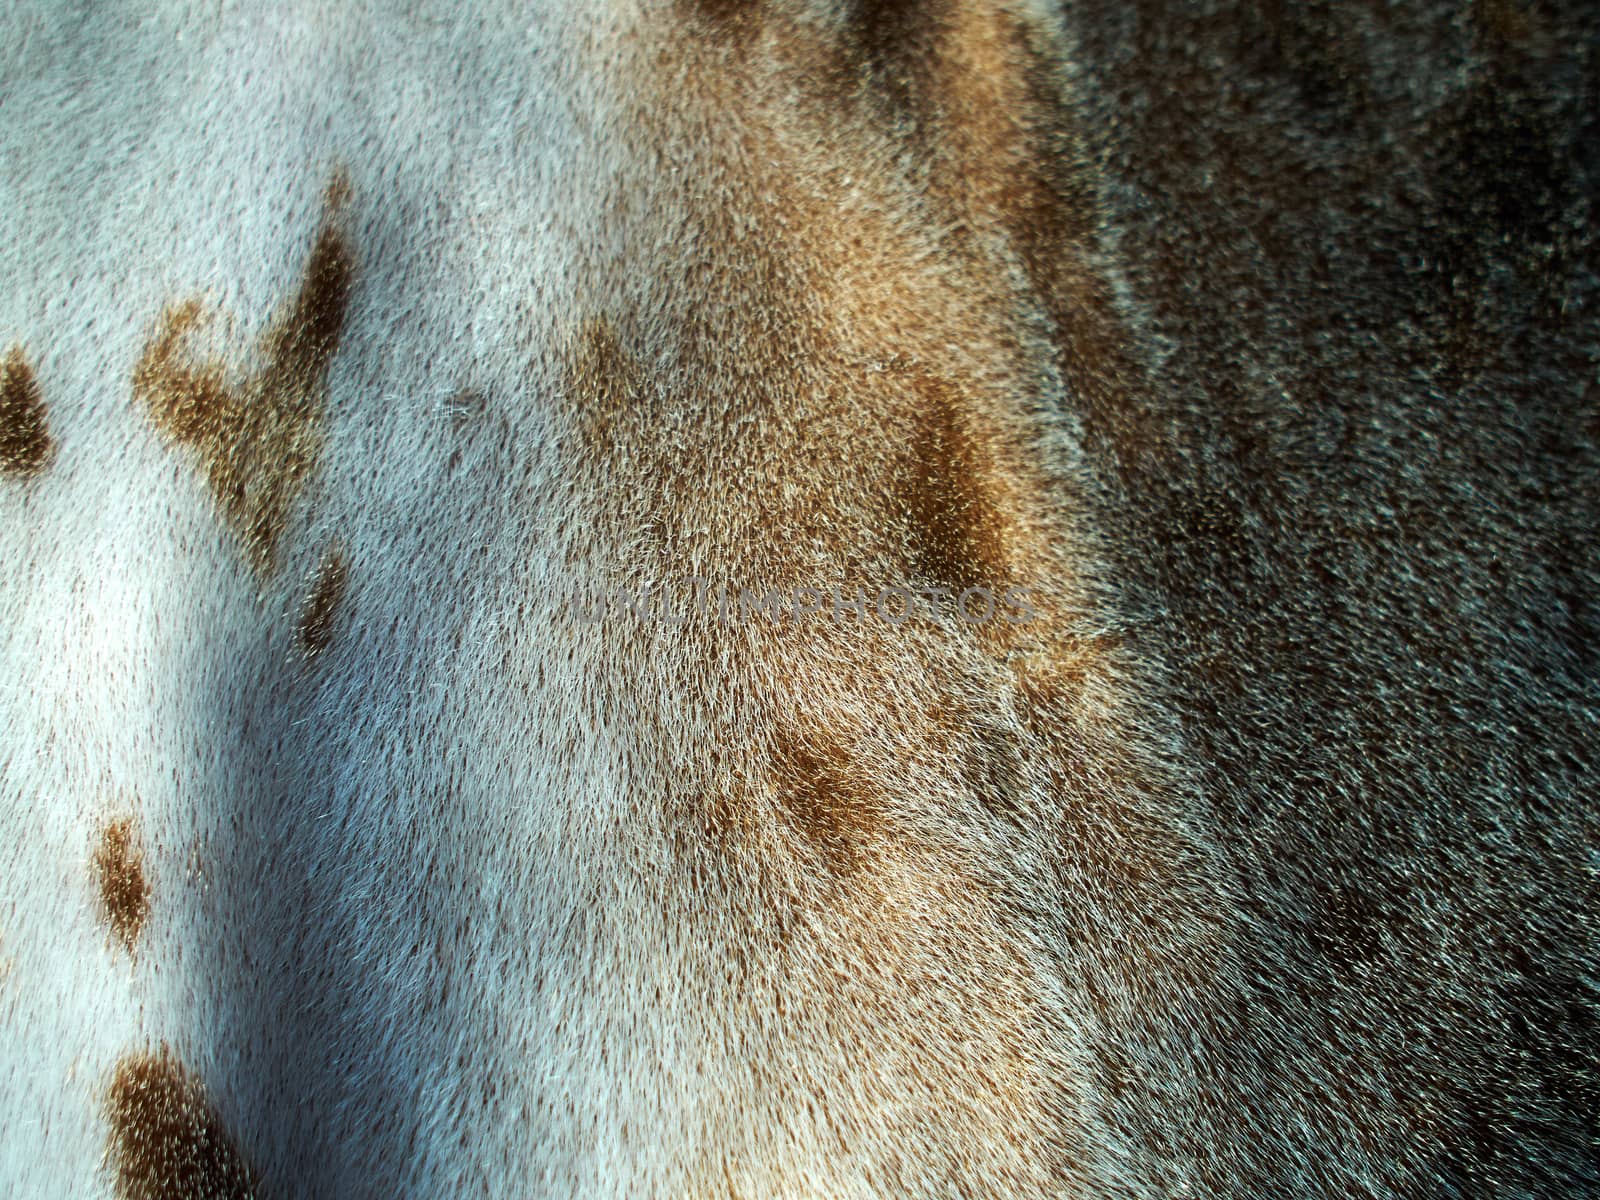 Texture of Arctic seal sea lion fur in close up view